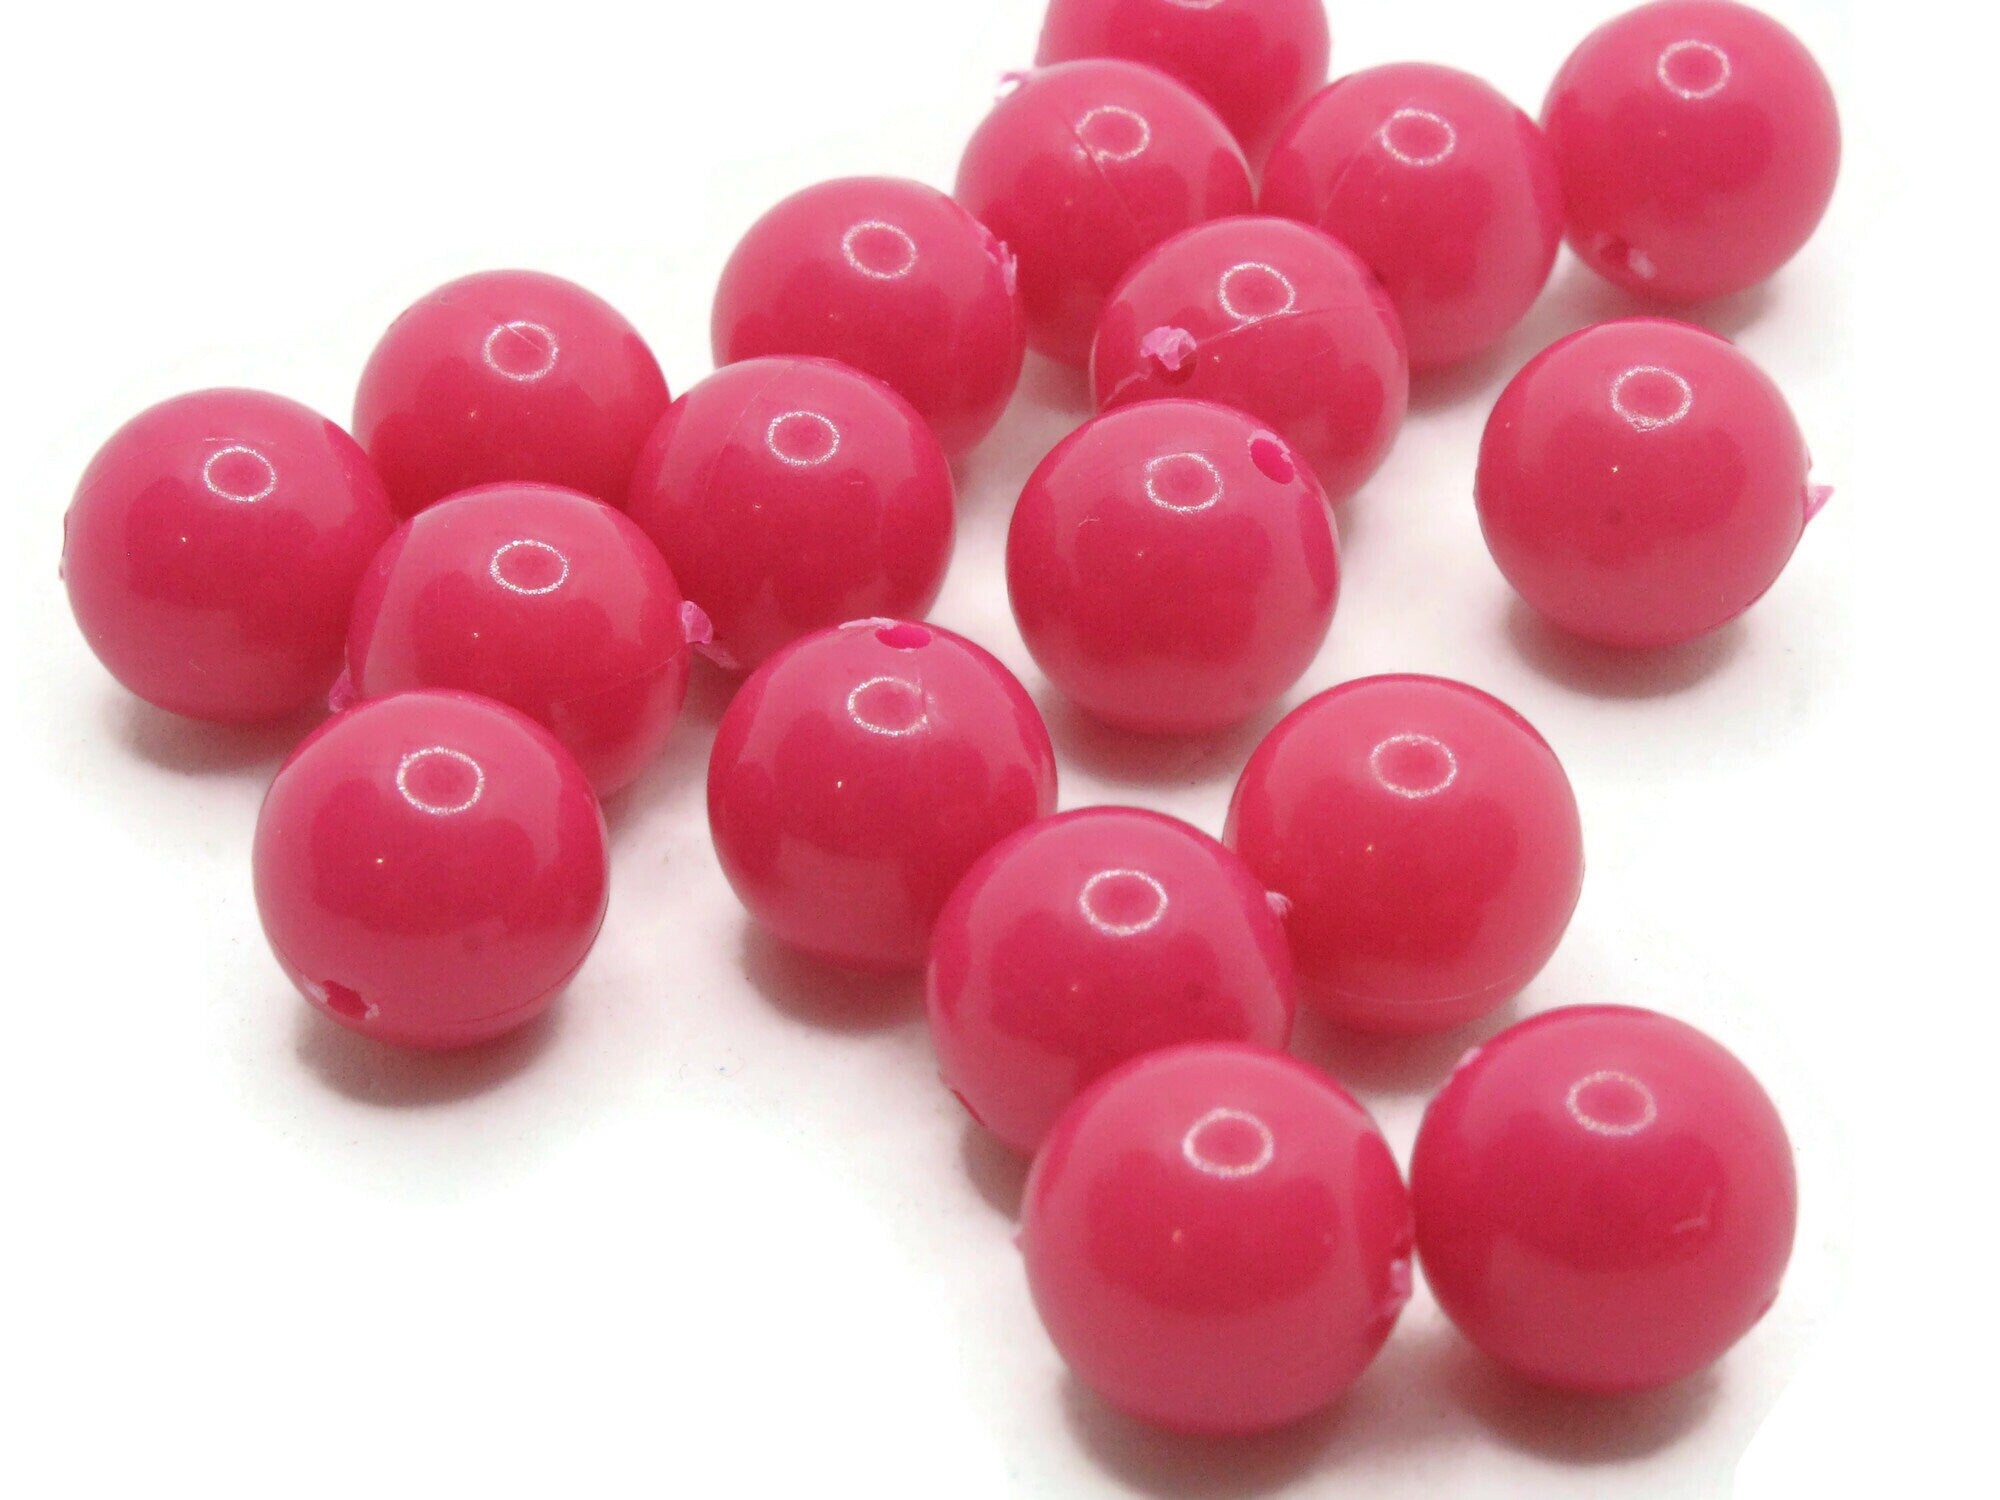 30 11mm Black and White Volleyball Round Plastic Sports Beads